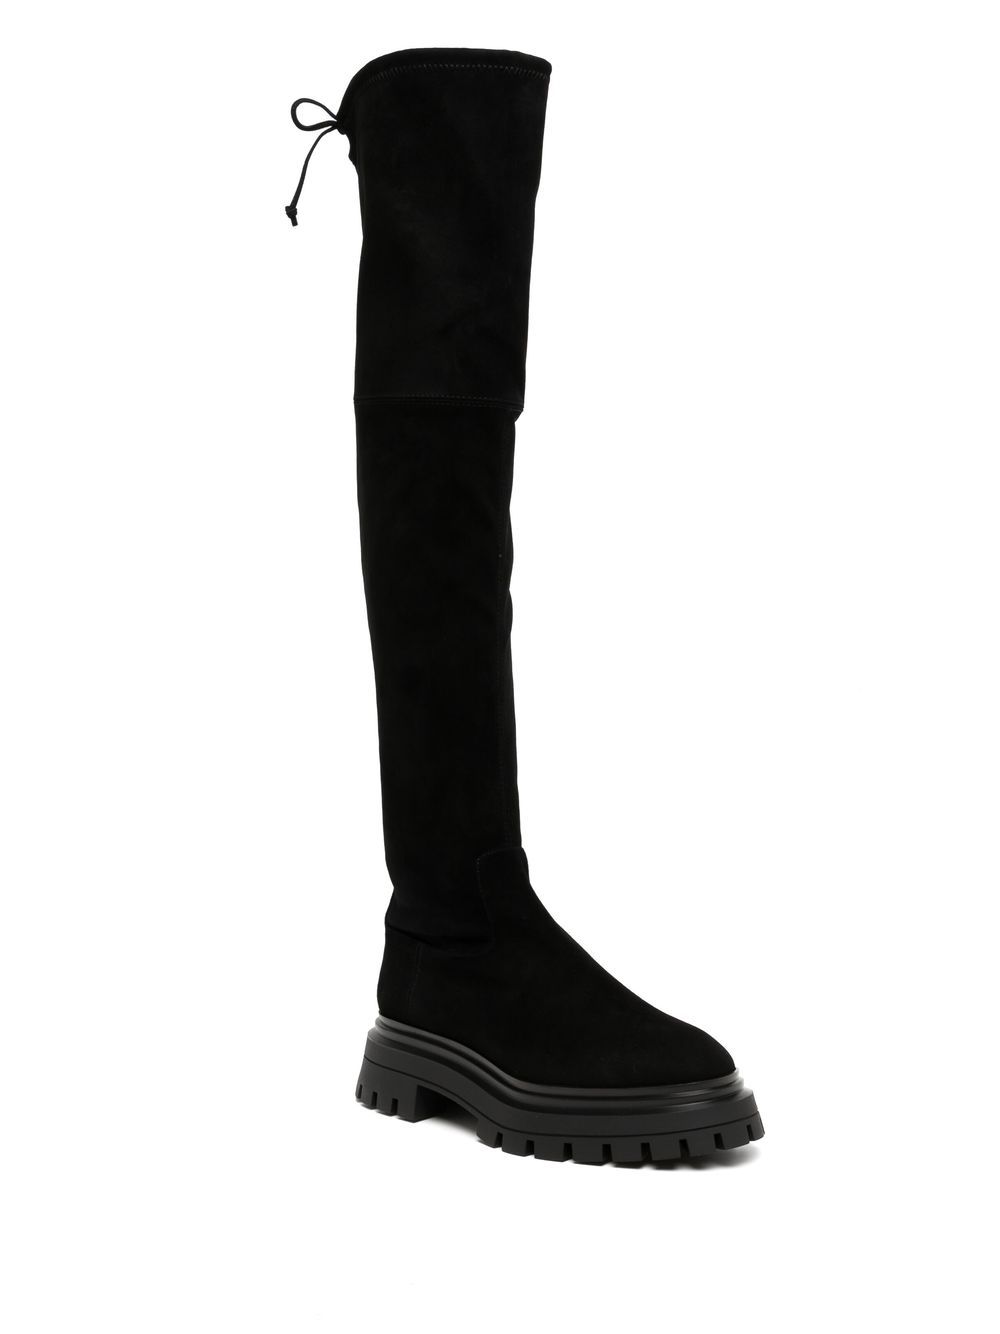 Image 2 of Stuart Weitzman tie-fastened thigh high boots